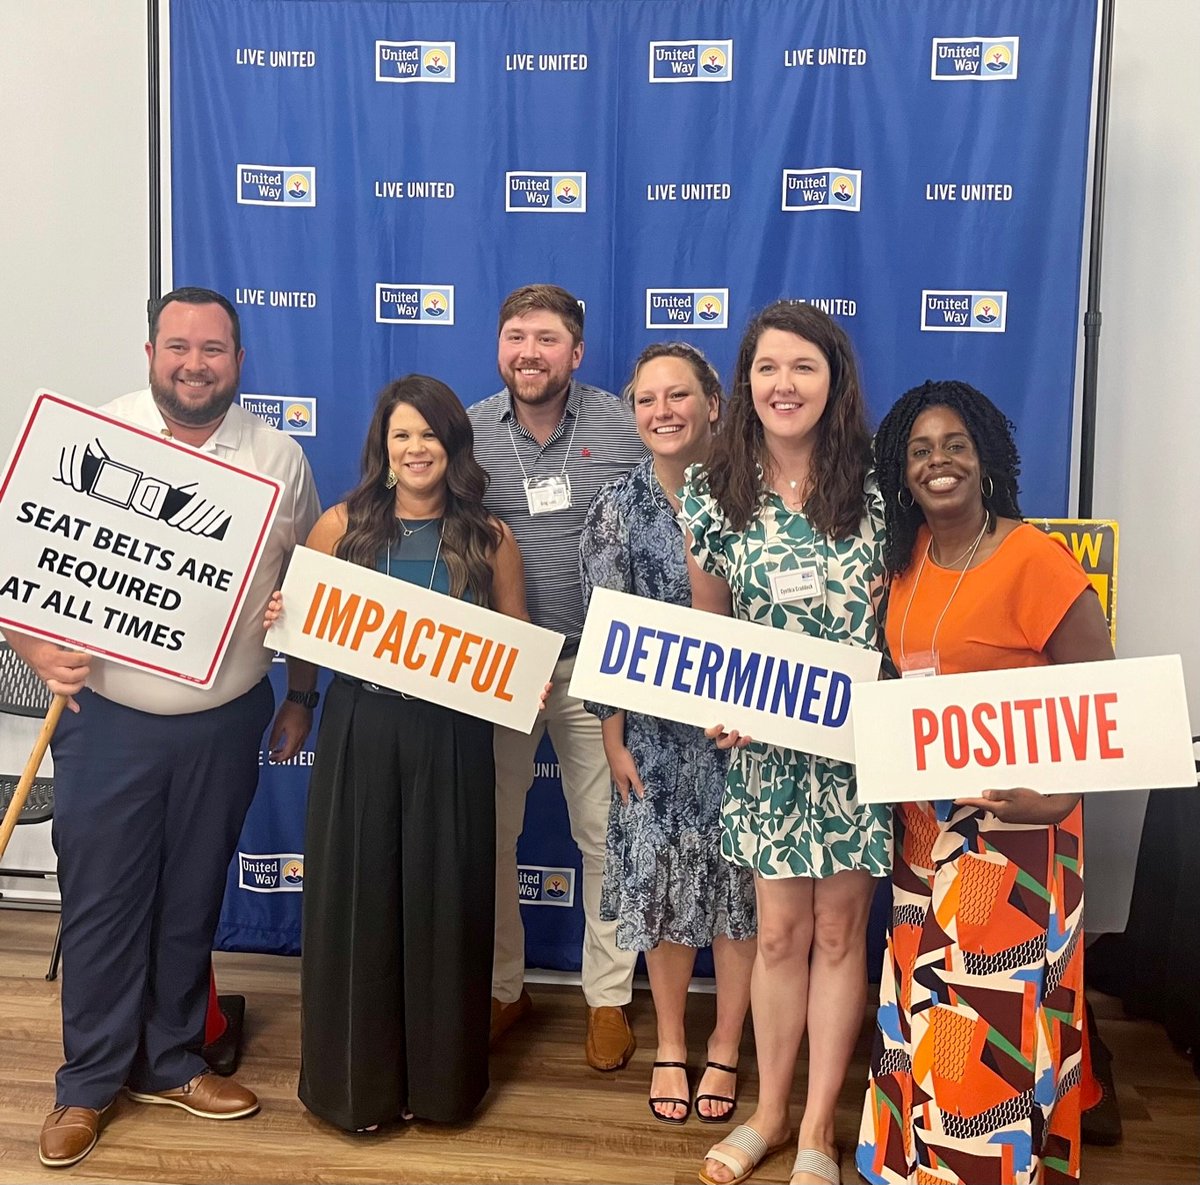 This year's Campaign Cabinet, led by Campaign Chair Jay Wilson, is ready to get to work to improve lives! 

#CampaignCabinetKick-off #WeAreOnARoll #LetsGetToWork #TeamUnited #LiveUnited #UWCE